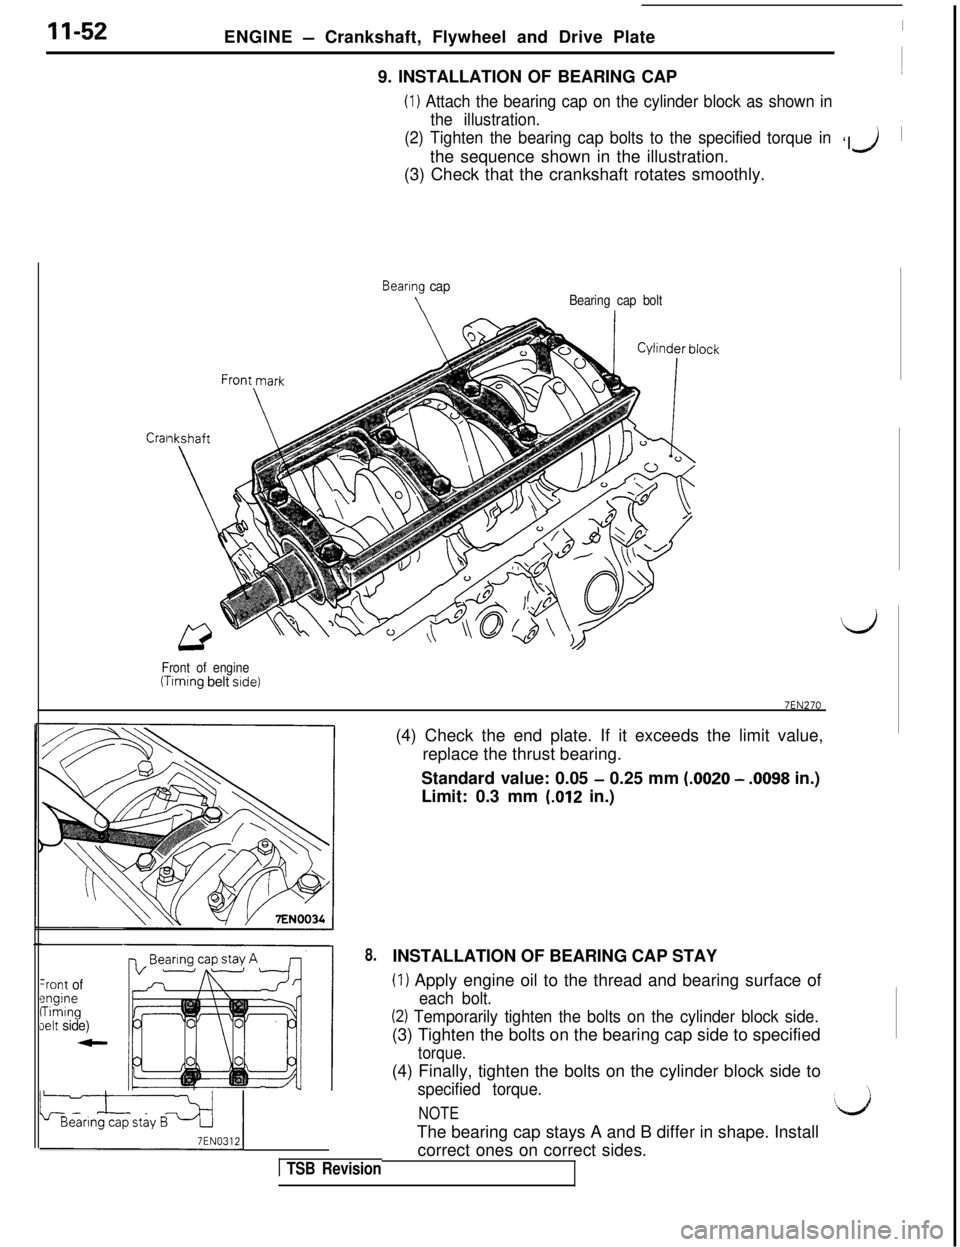 MITSUBISHI 3000GT 1991  Service Manual 11-52ENGINE - Crankshaft, Flywheel and Drive Plate
9. INSTALLATION OF BEARING CAP
(1) Attach the bearing cap on the cylinder block as shown in
the illustration.
(2) Tighten the bearing cap bolts to th